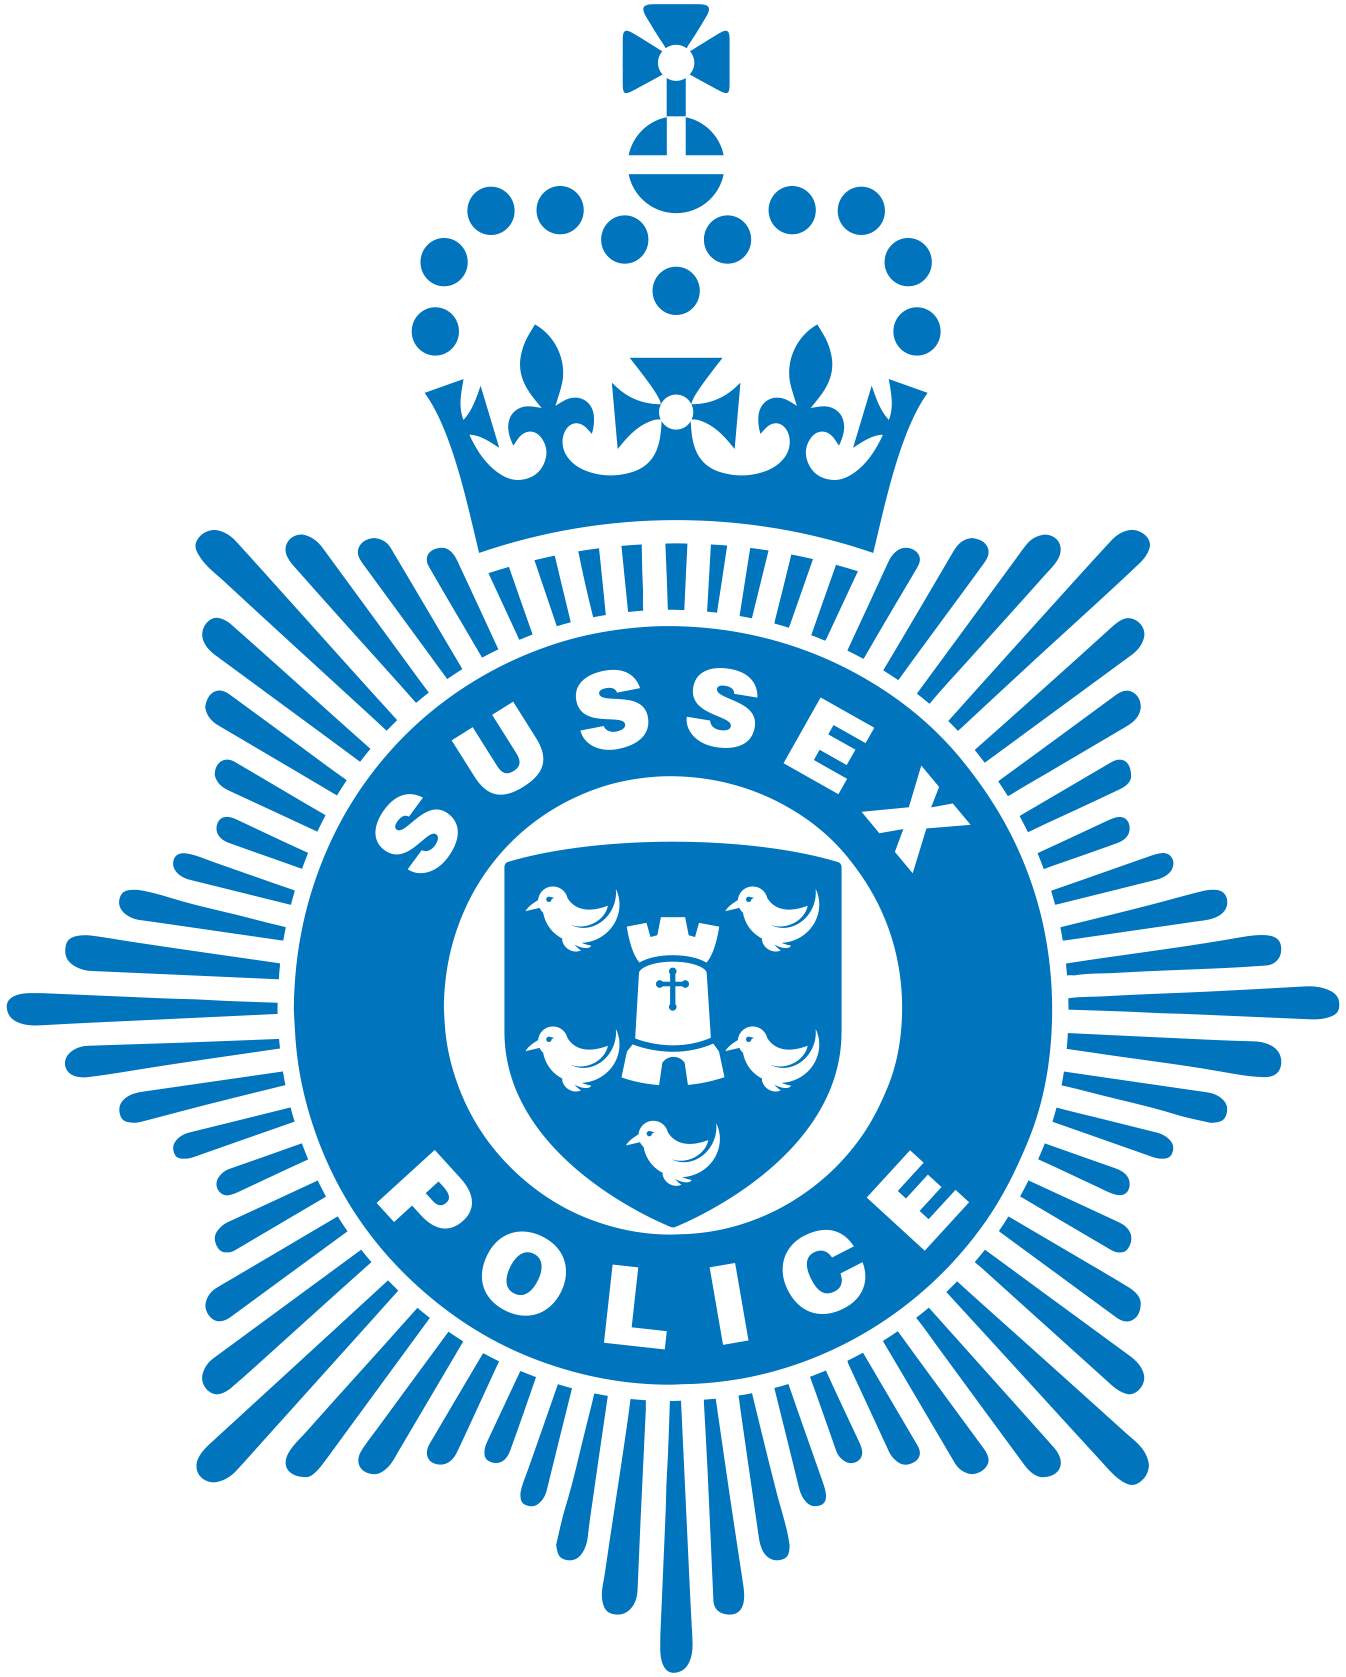 sussex-police-logopng